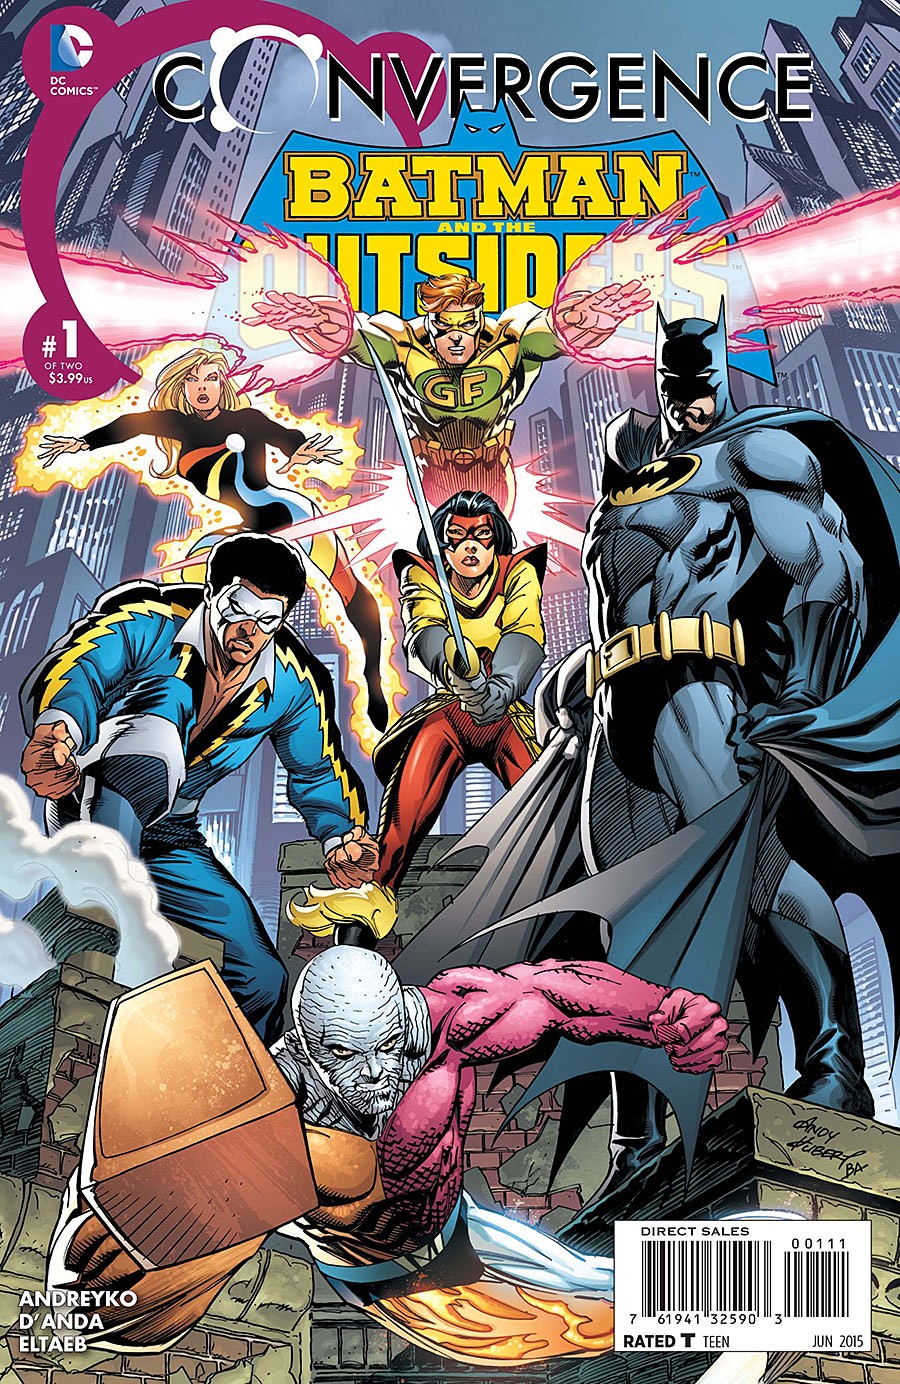 Convergence: Batman and the Outsiders Vol. 1 #1